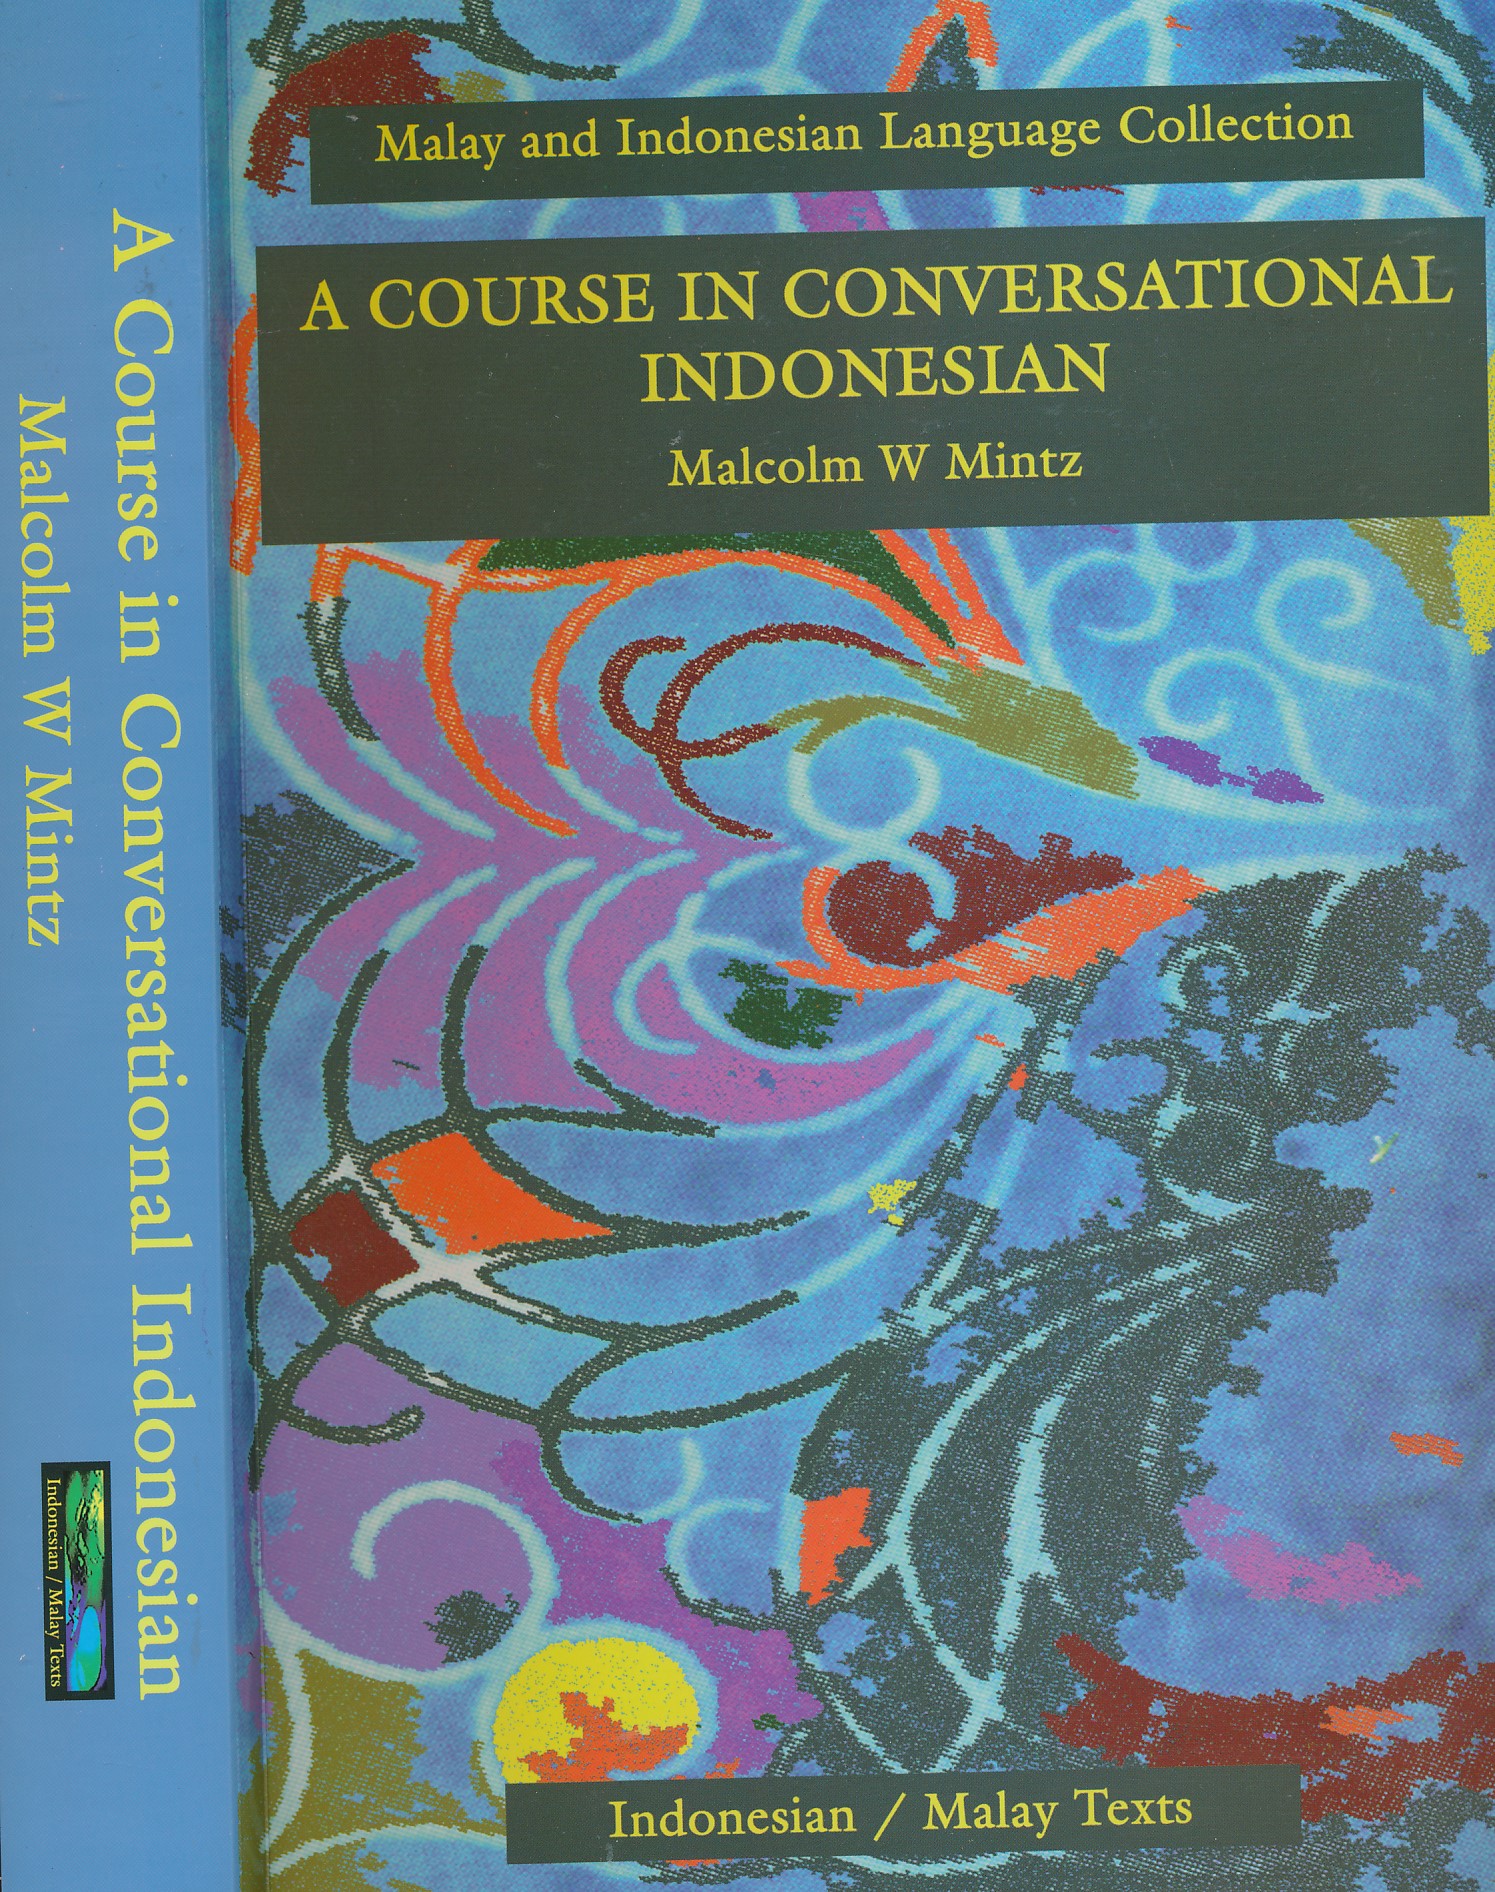 A Course in Conversational Indonesian